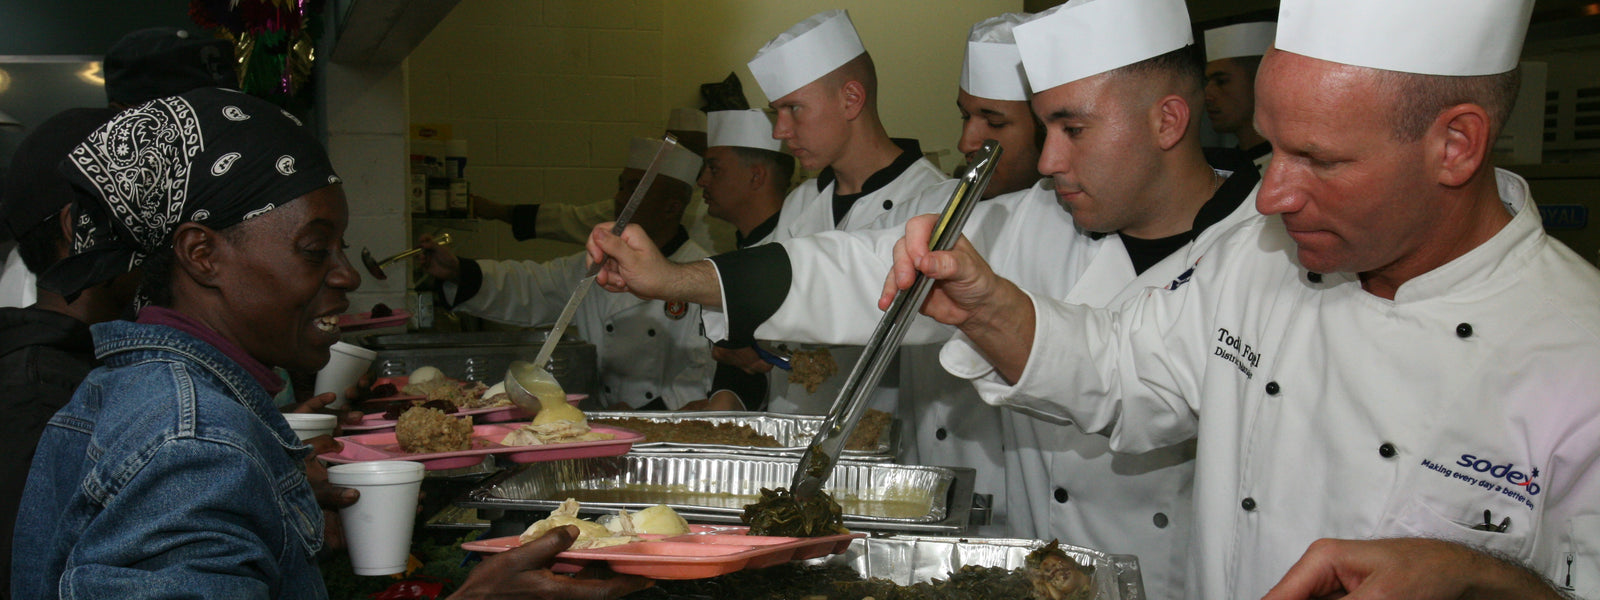 Serving others on Thanksgiving during Retirement